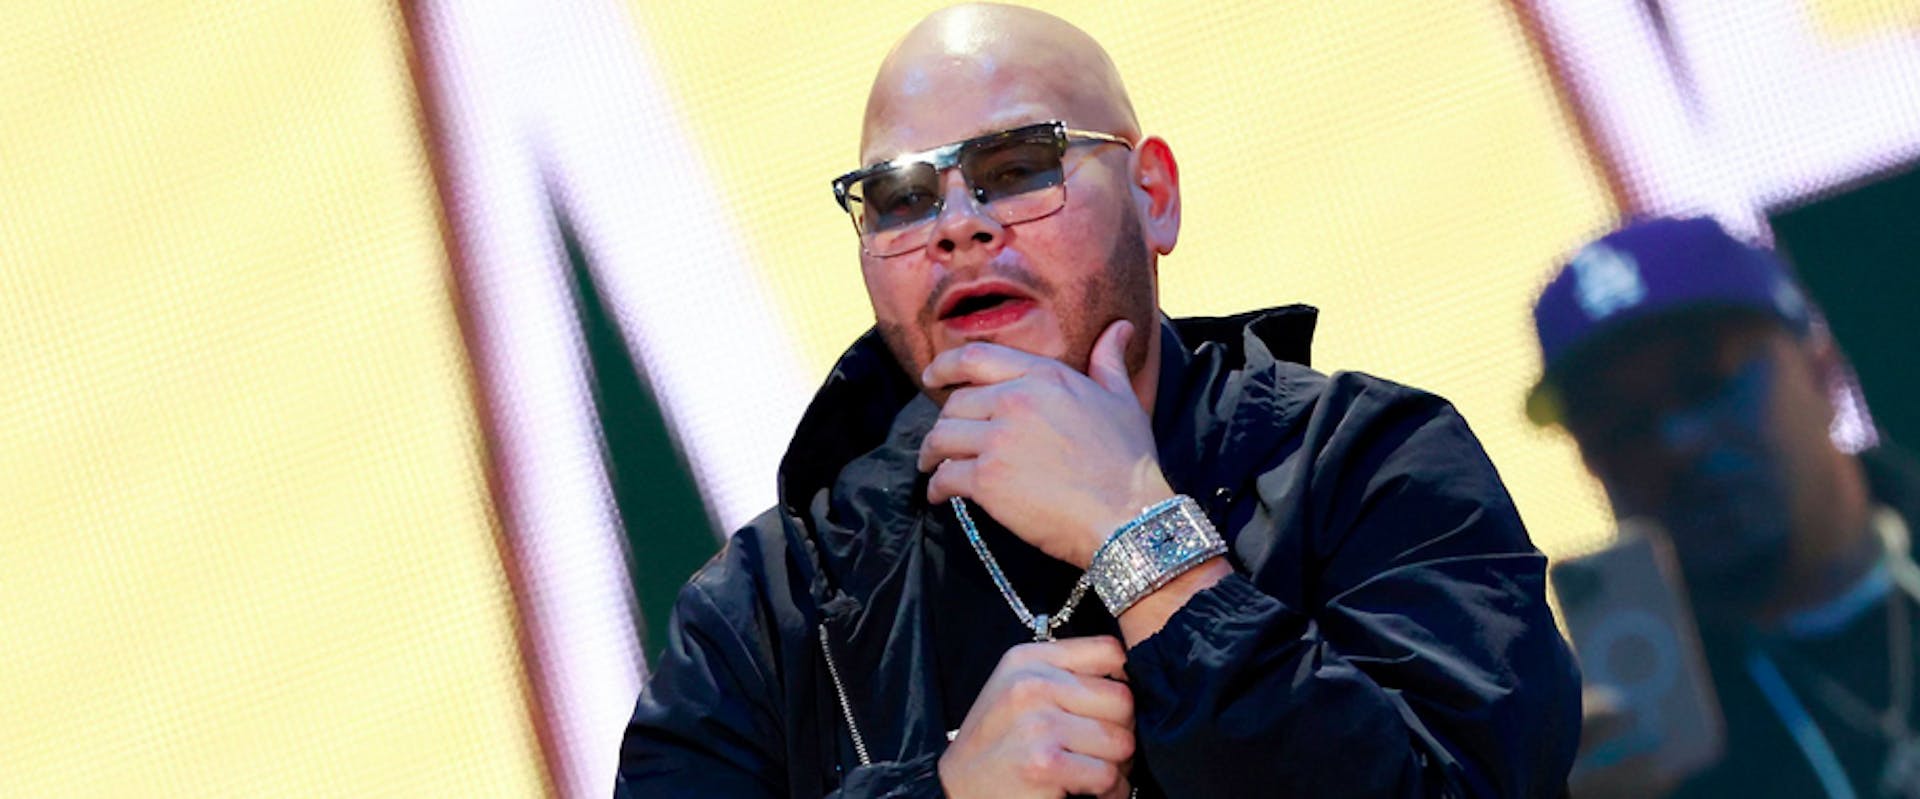 MIAMI, FLORIDA - OCTOBER 15: Fat Joe performs onstage at the 2022 iHeartRadio Fiesta Latina held at FTX Arena on October 15, 2022 in Miami, Florida. 